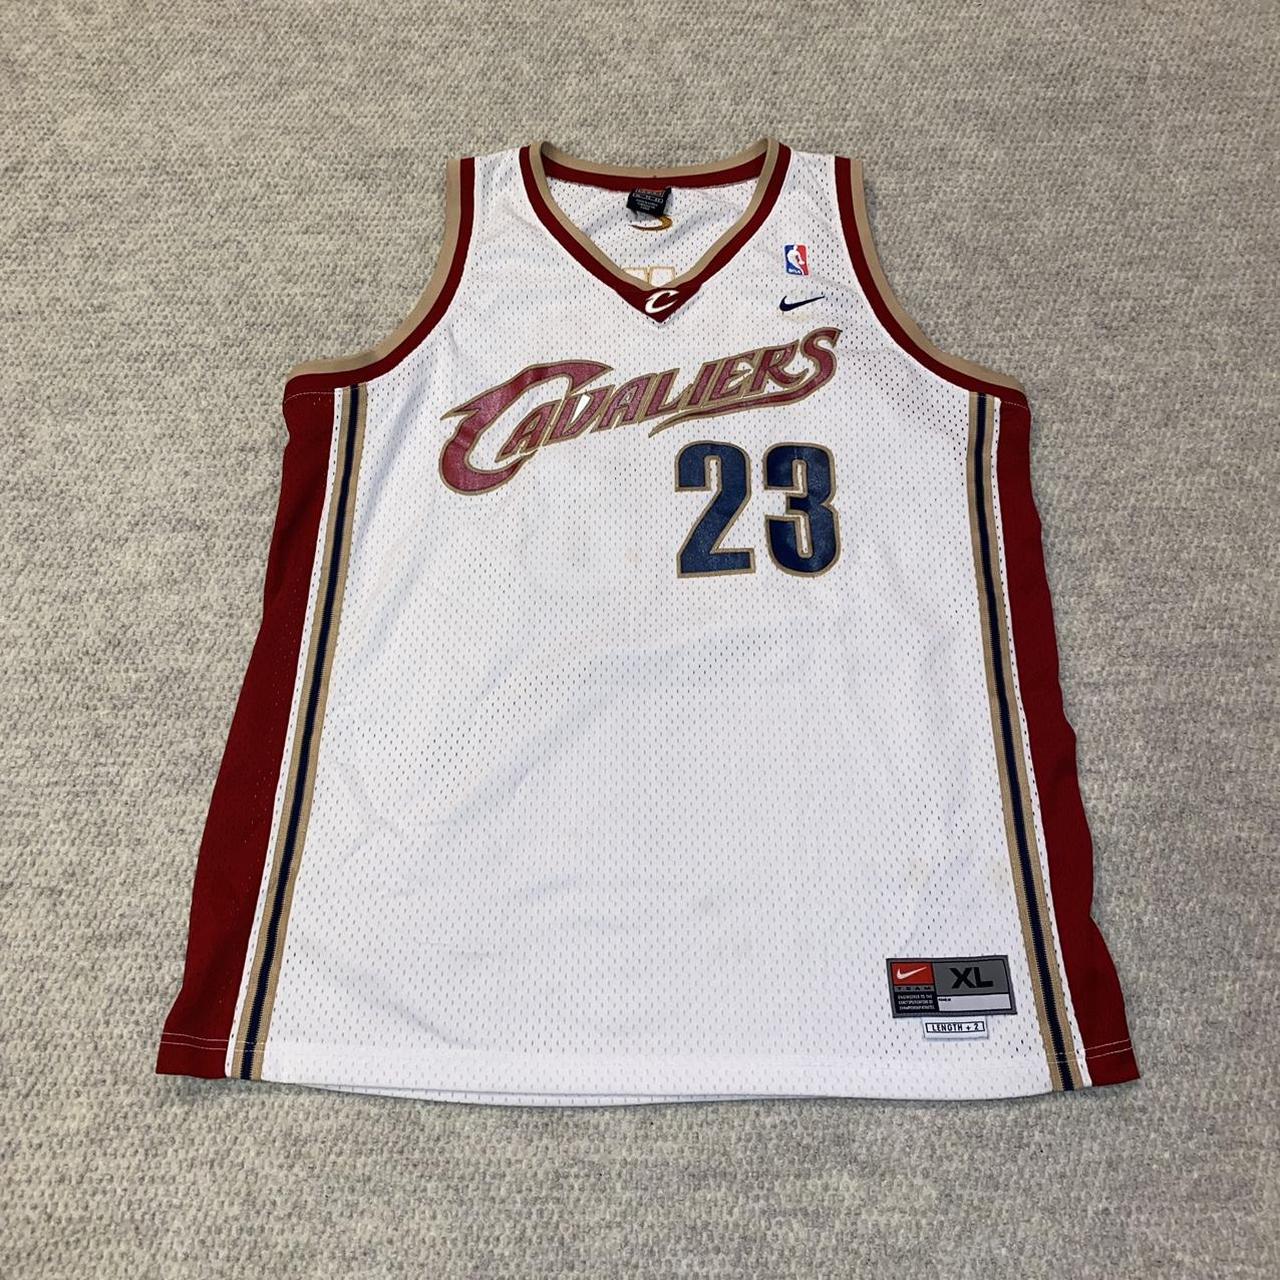 Nike Cleveland Cavaliers LeBron James youth jersey. - Depop